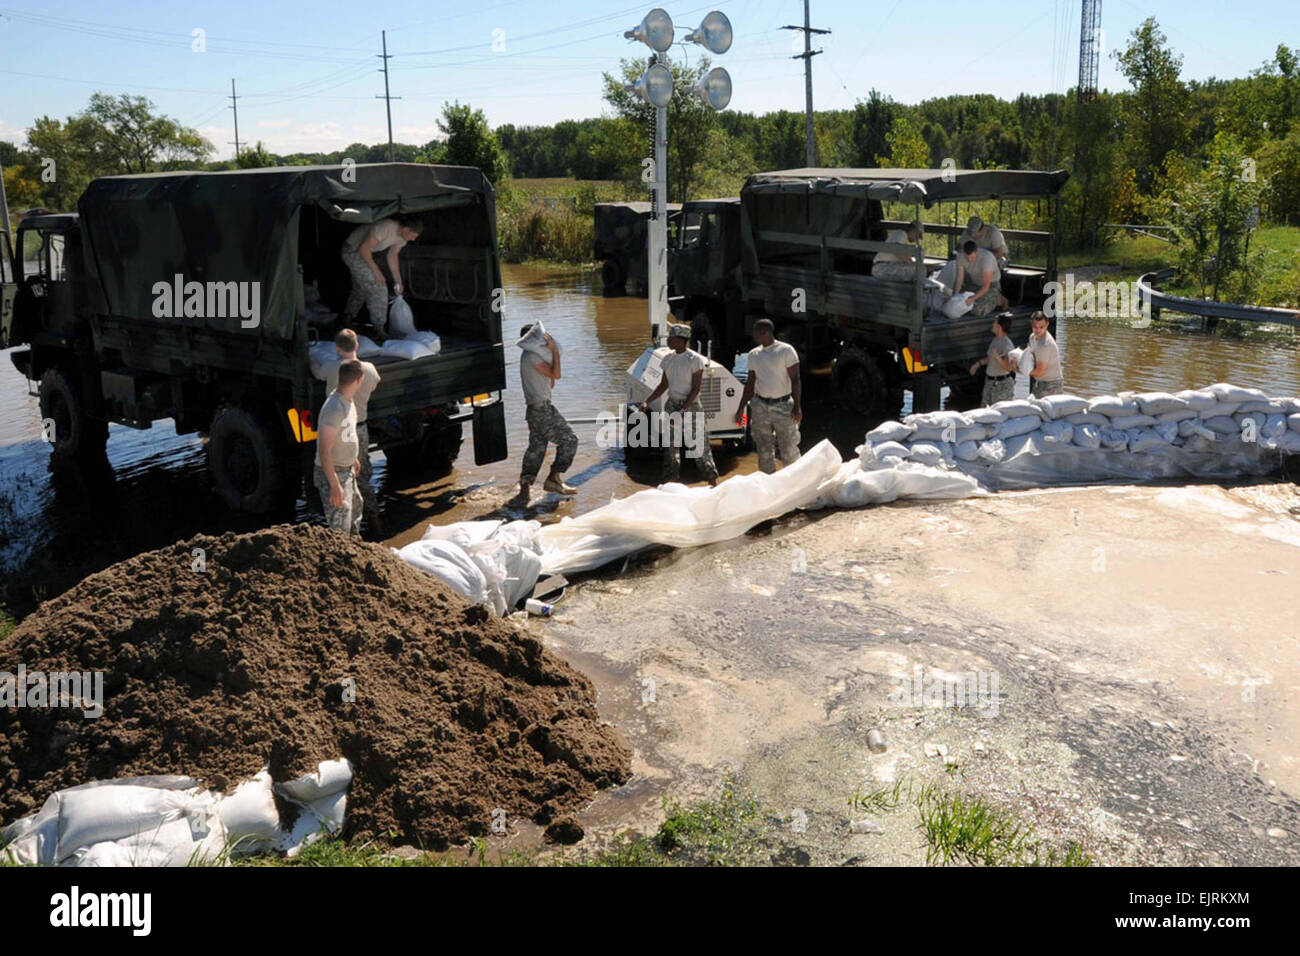 The remnants of Hurricane Ike that smashed the Texas coastline on September 12, 2008, dumped over 10 inches of rain on several Northwestern Indiana counties causing lake, rivers, tributaries and levies to spill over their banks and cause massive flooding.  On September 16th, Members of the Indiana Army National Guard 113th Engineer Battalion tossed thousands of sand bags on to failing levies in Gary, Indiana, to help shore them up and stop further flooding. Stock Photo